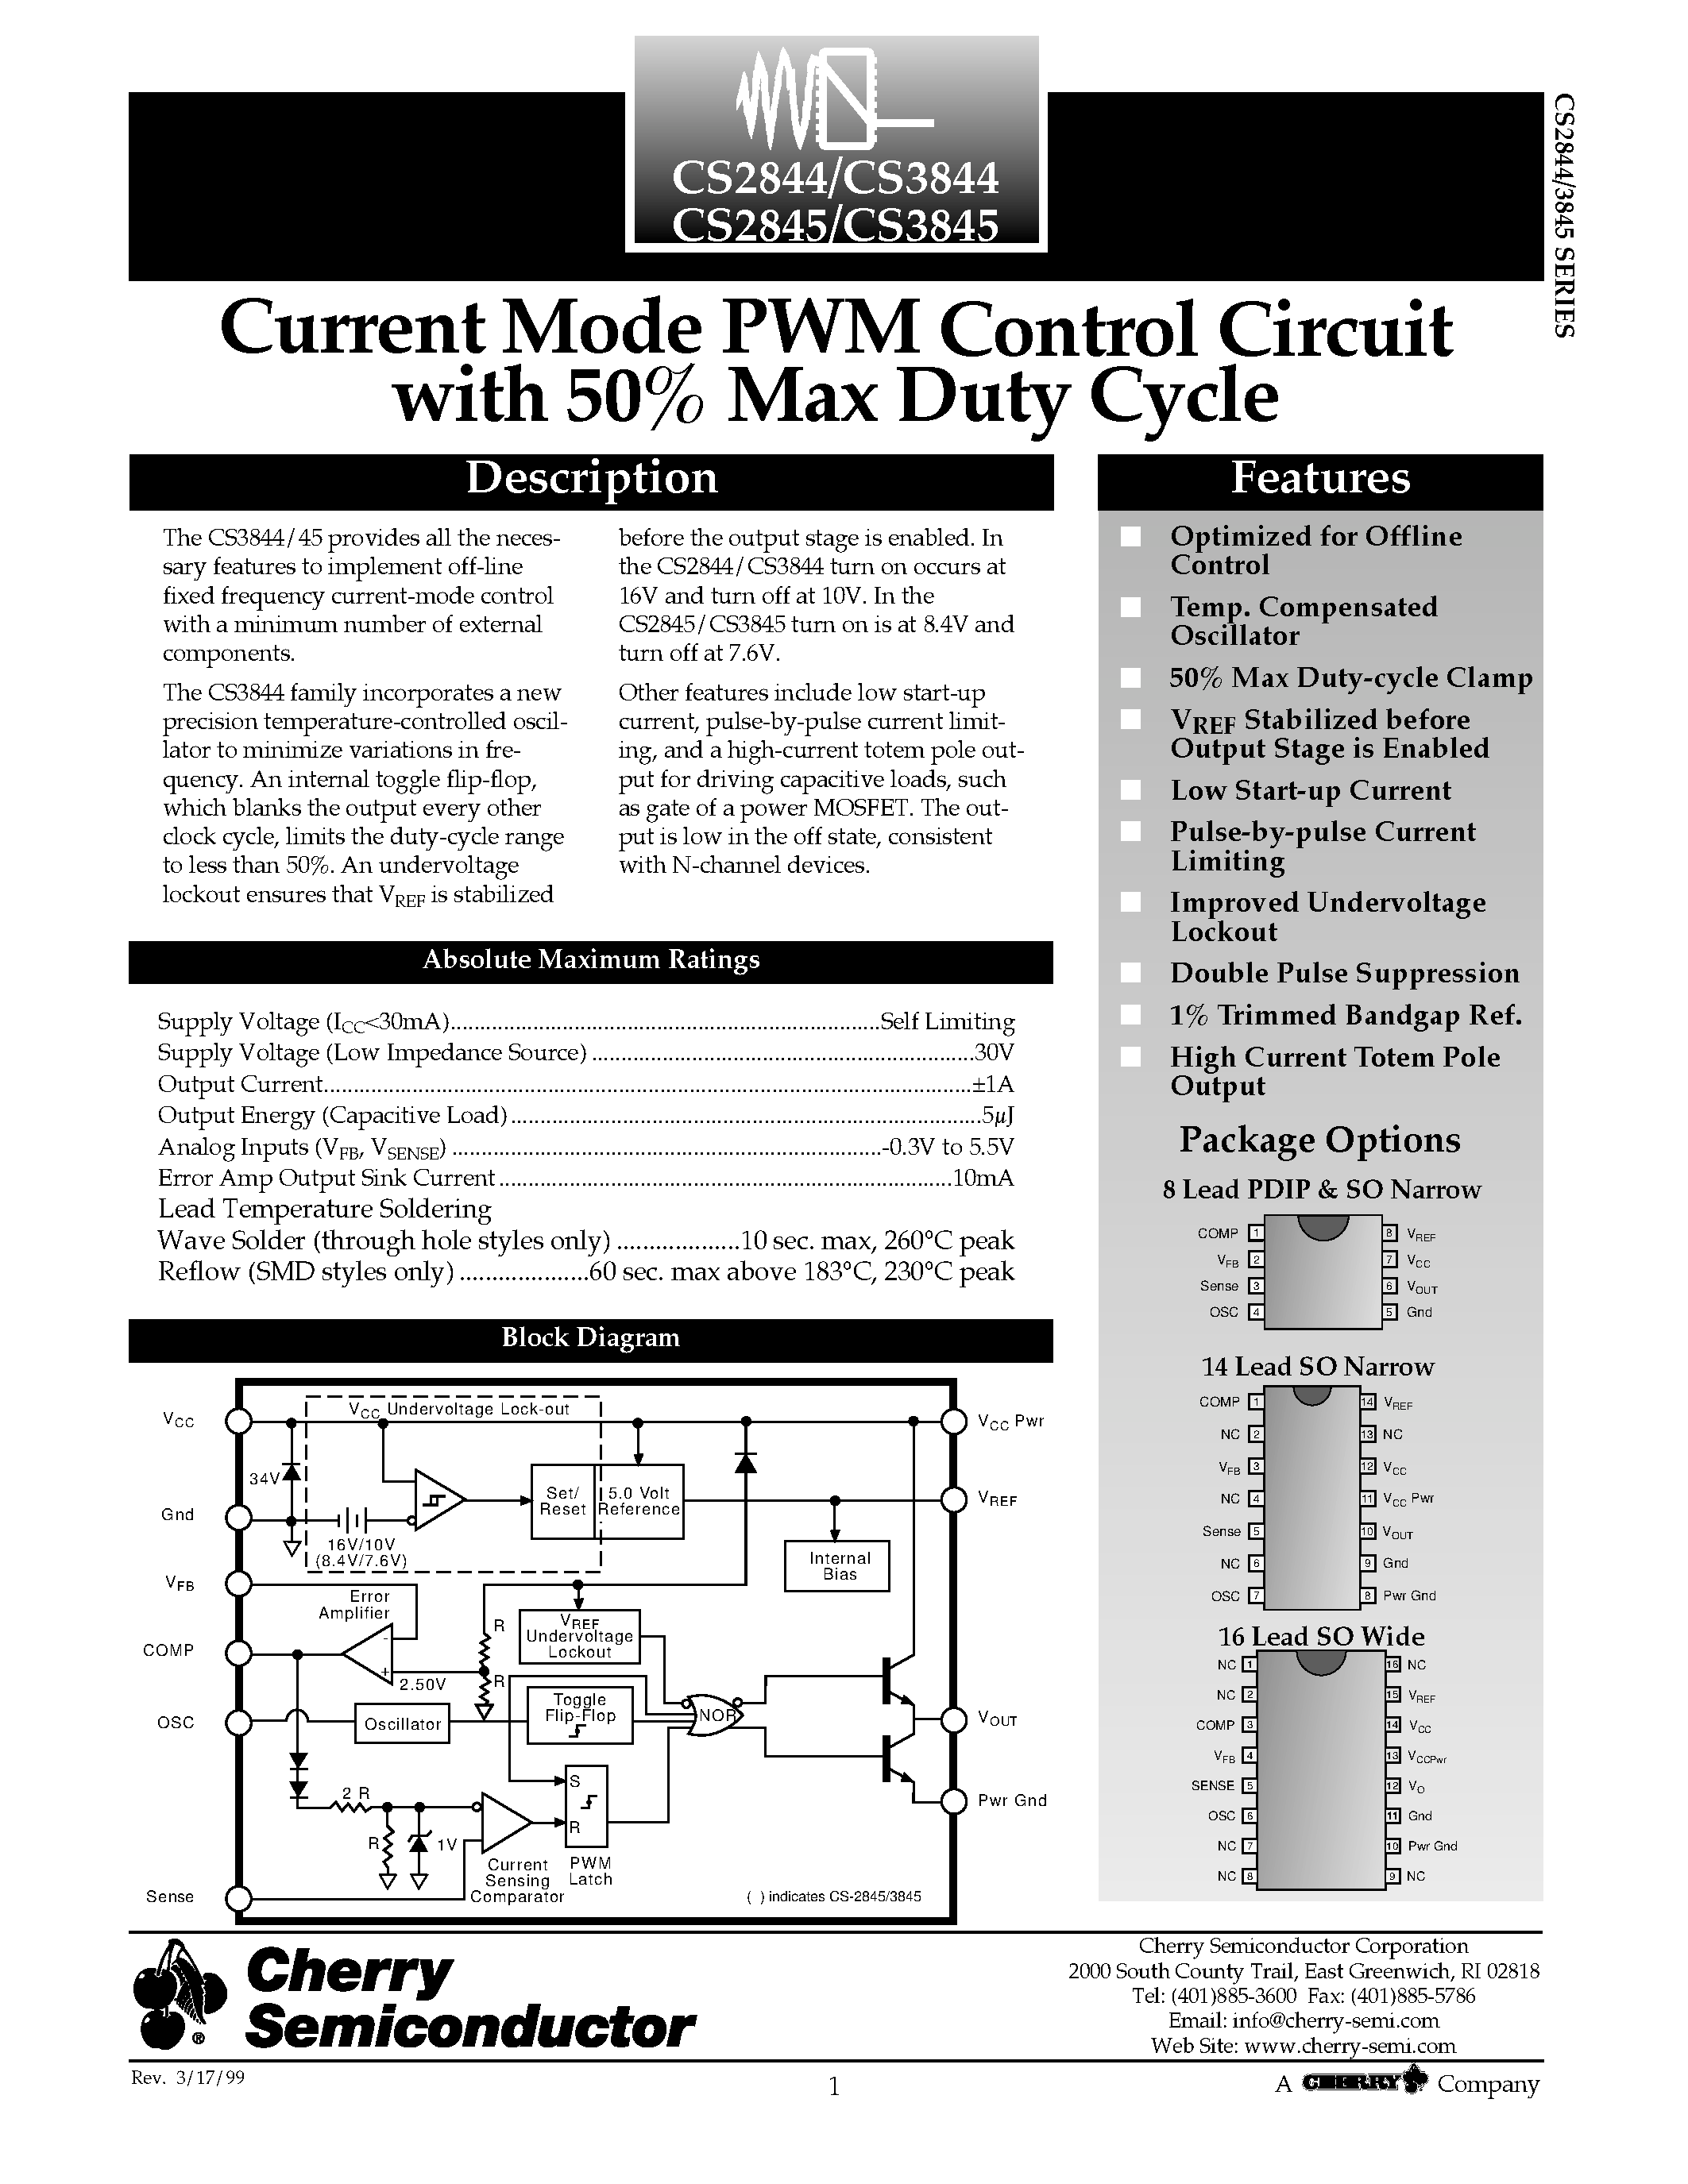 Datasheet CS2844LDW16 - Current Mode PWM Control Circuit with 50% Max Duty Cycle page 1